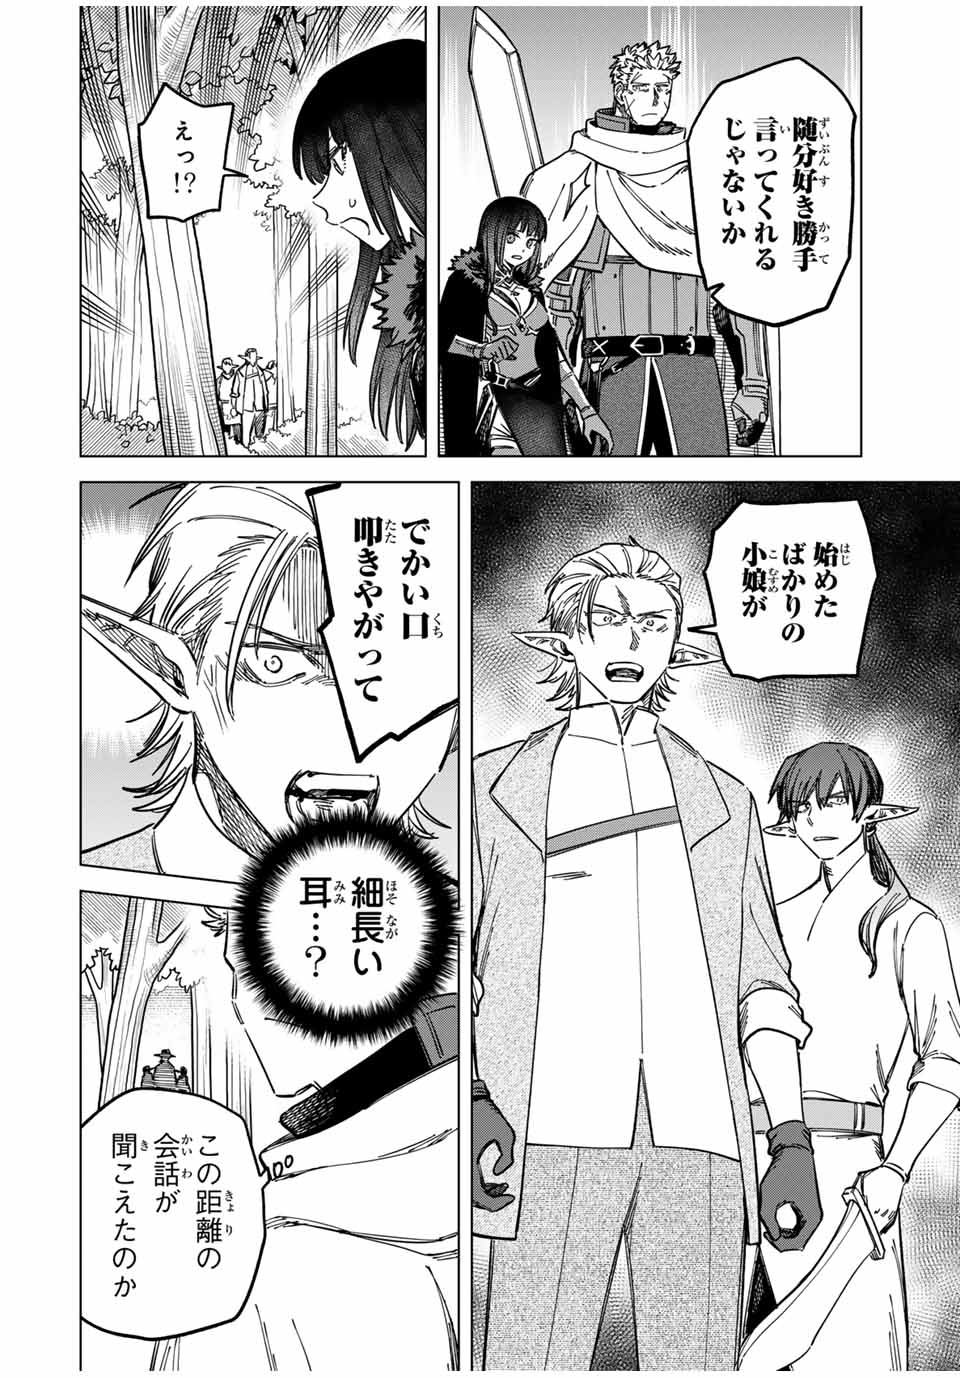 Witch and Mercenary 魔女と傭兵 第9.1話 - Page 4